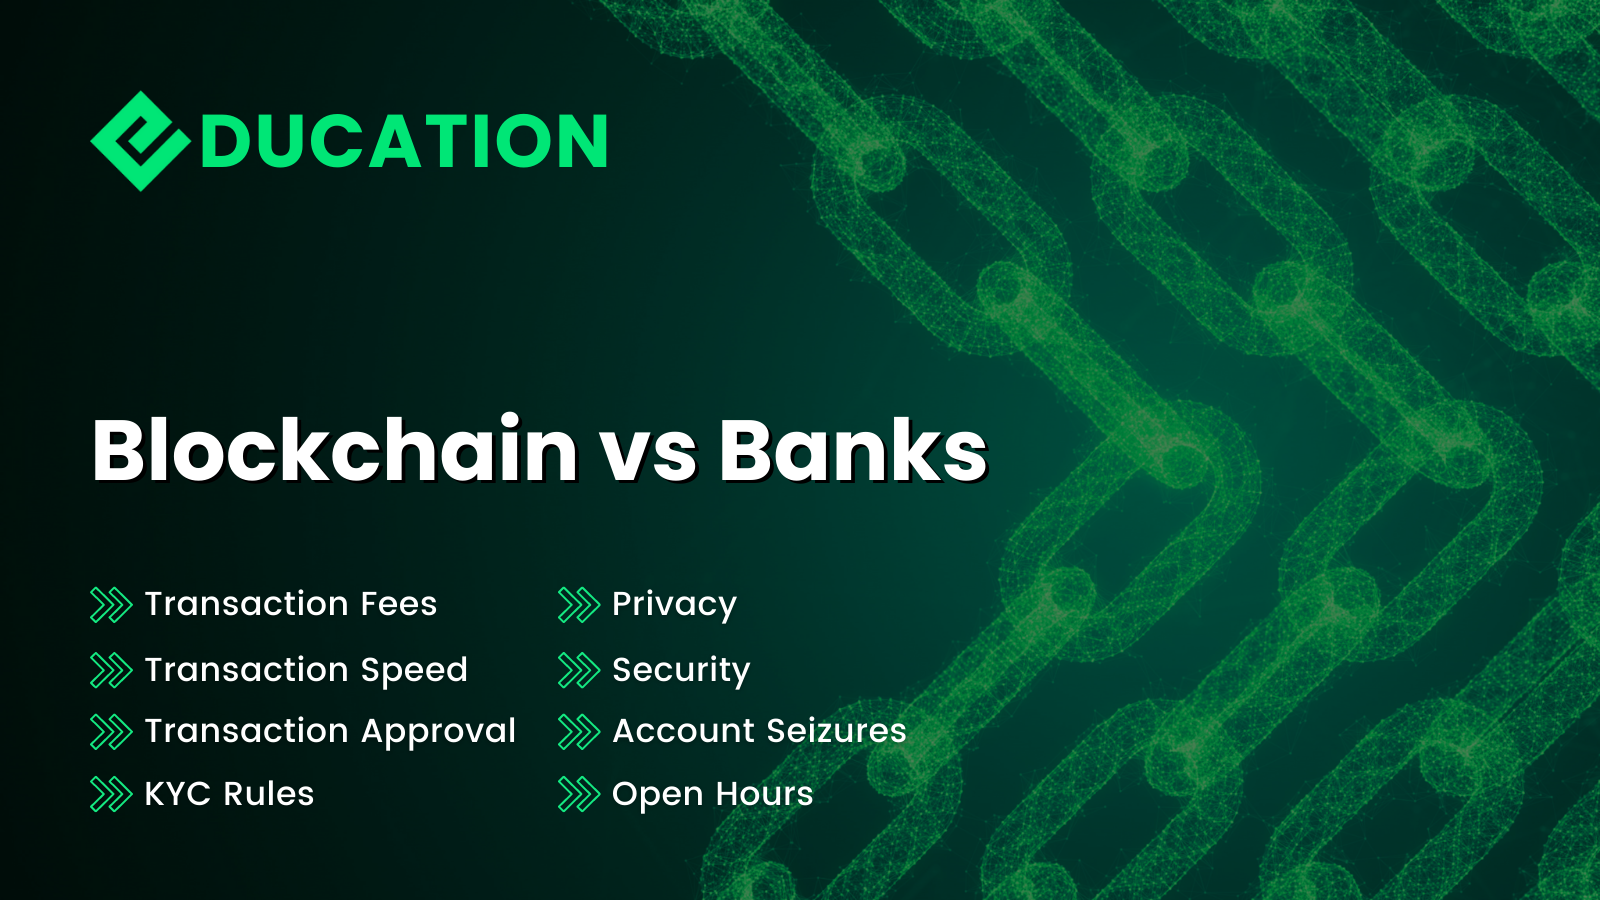 Cover image presenting blockchain vs banks attributes and differences